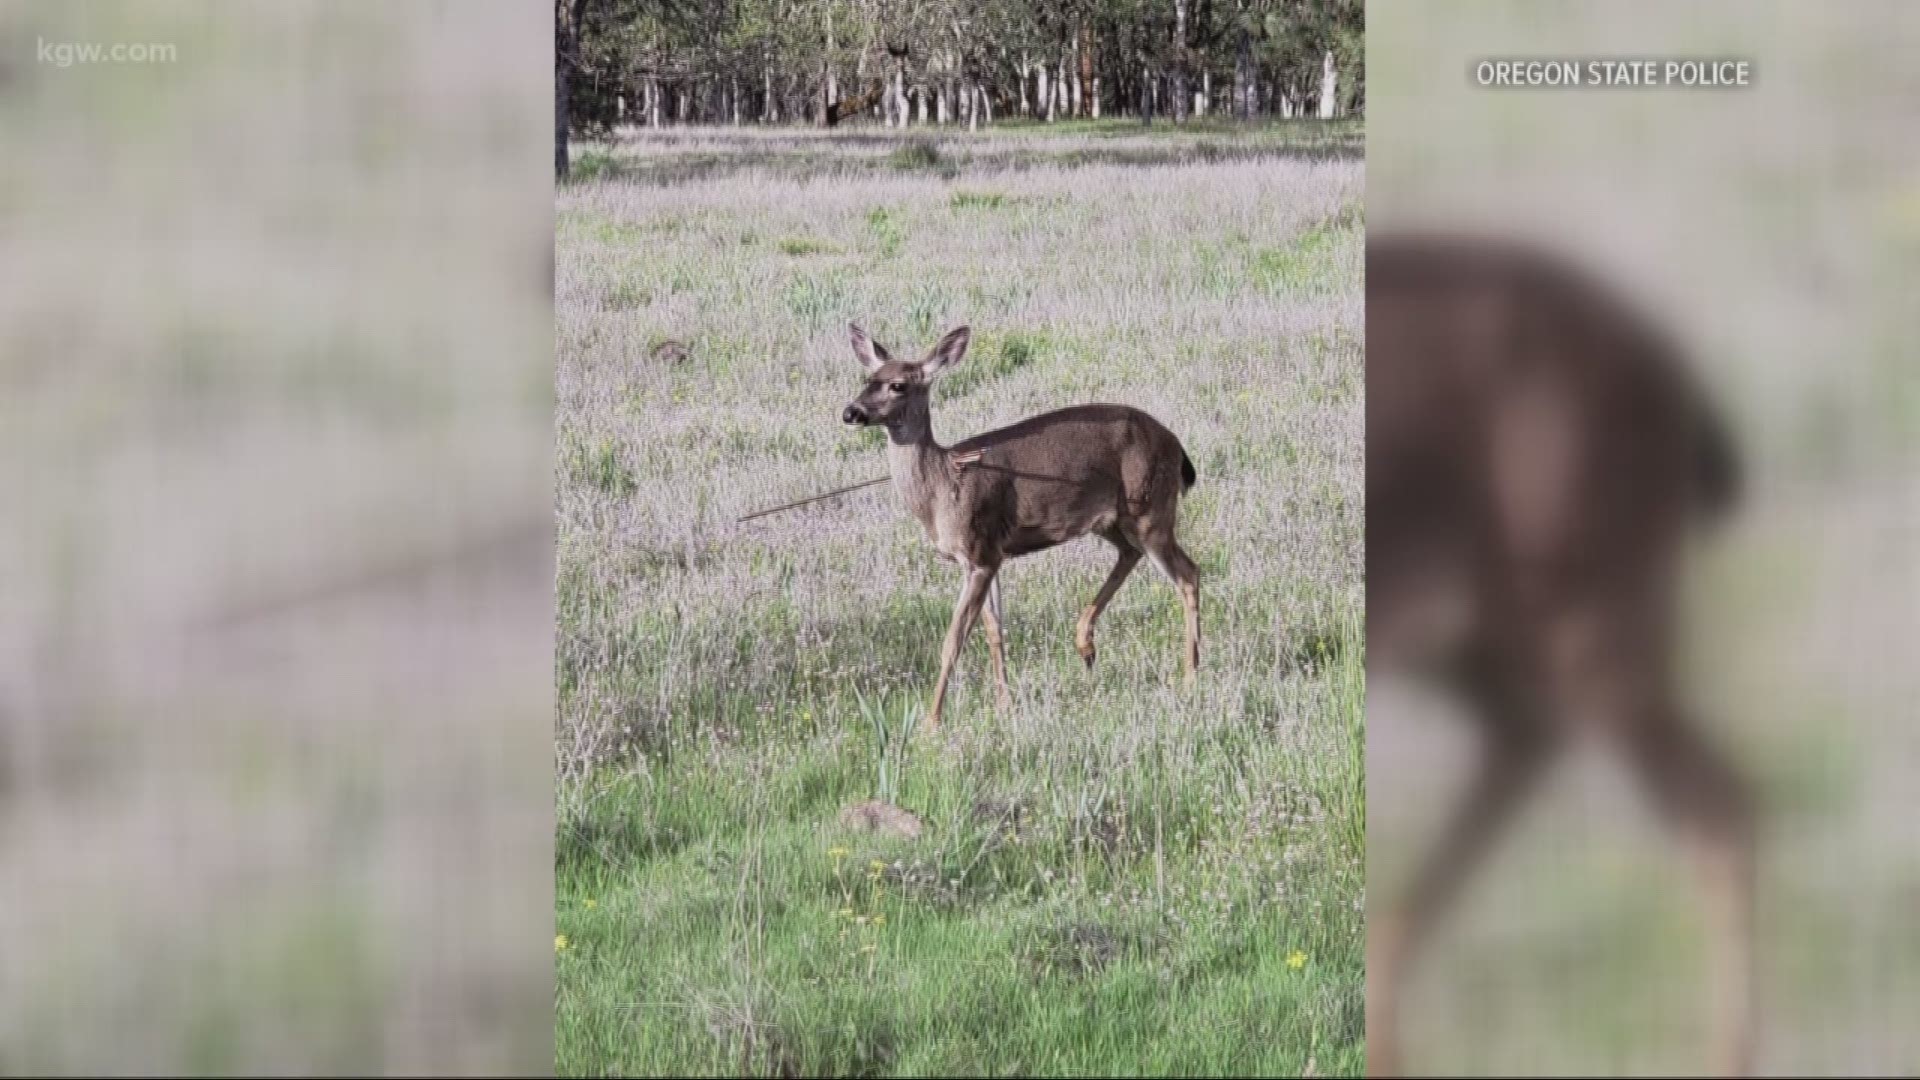 Southern Oregon officials are trying to find the person responsible for shooting a pair of deer with arrows.